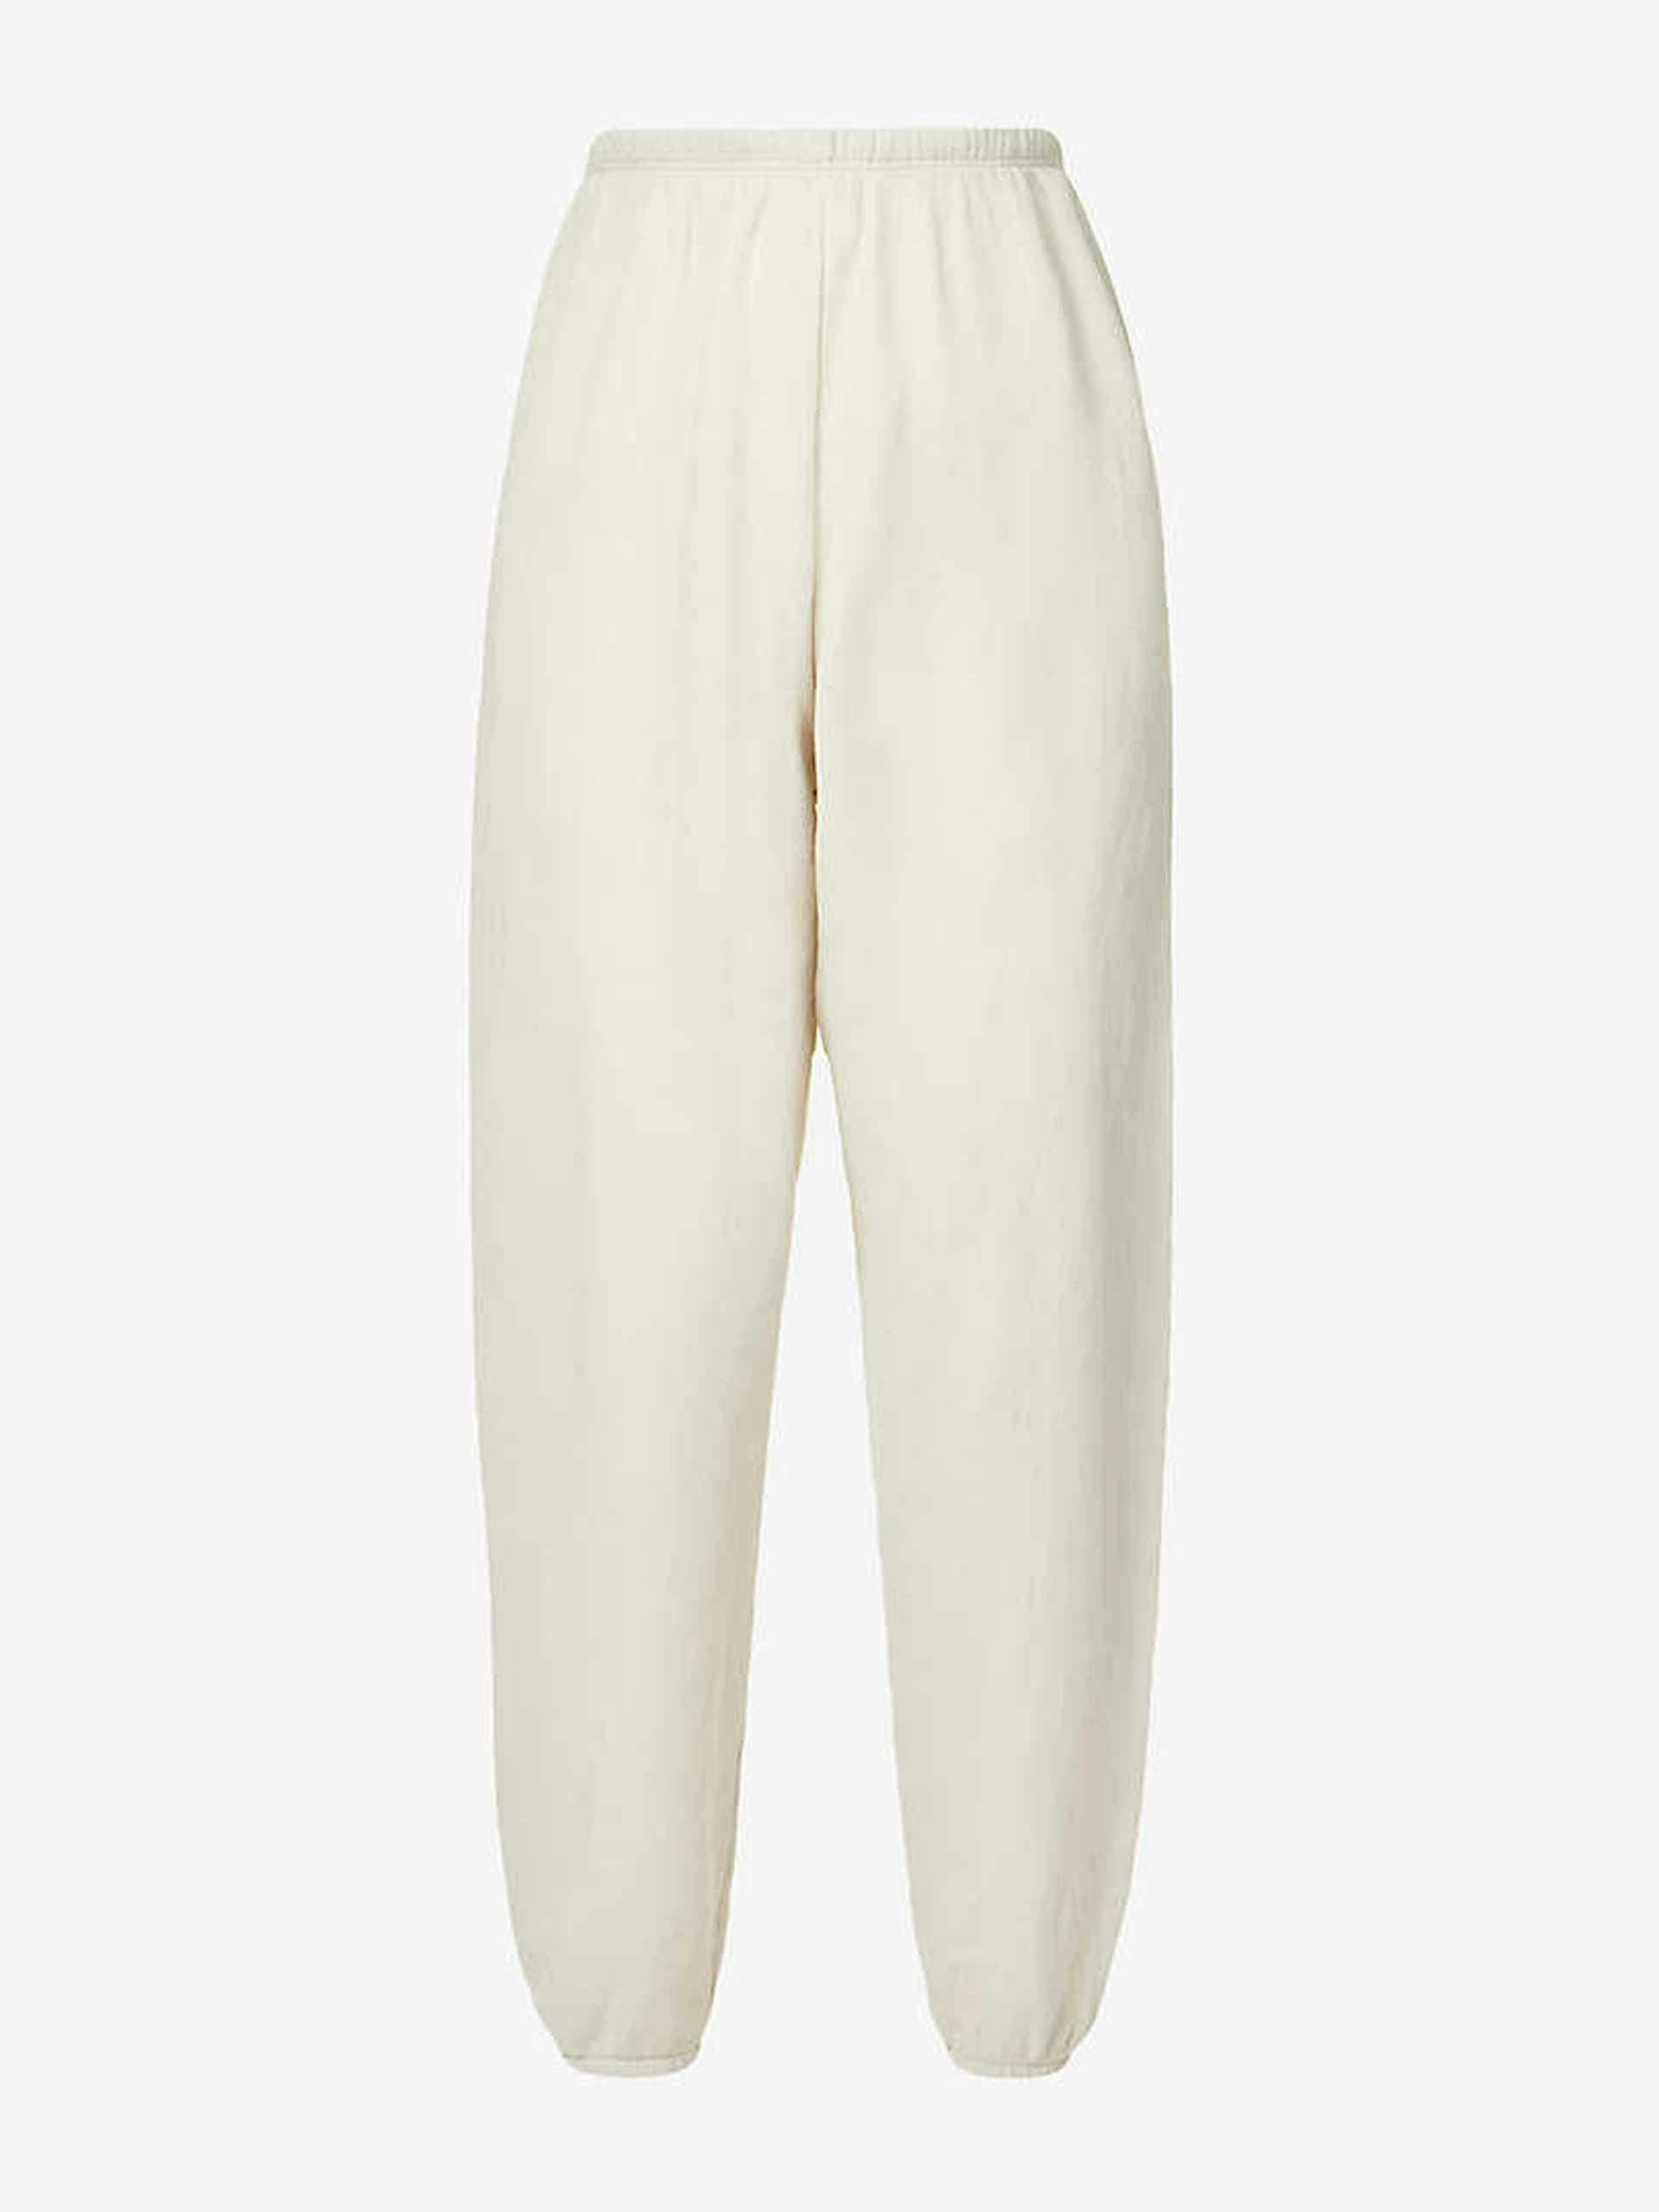 Oversized mid-rise cotton track pants